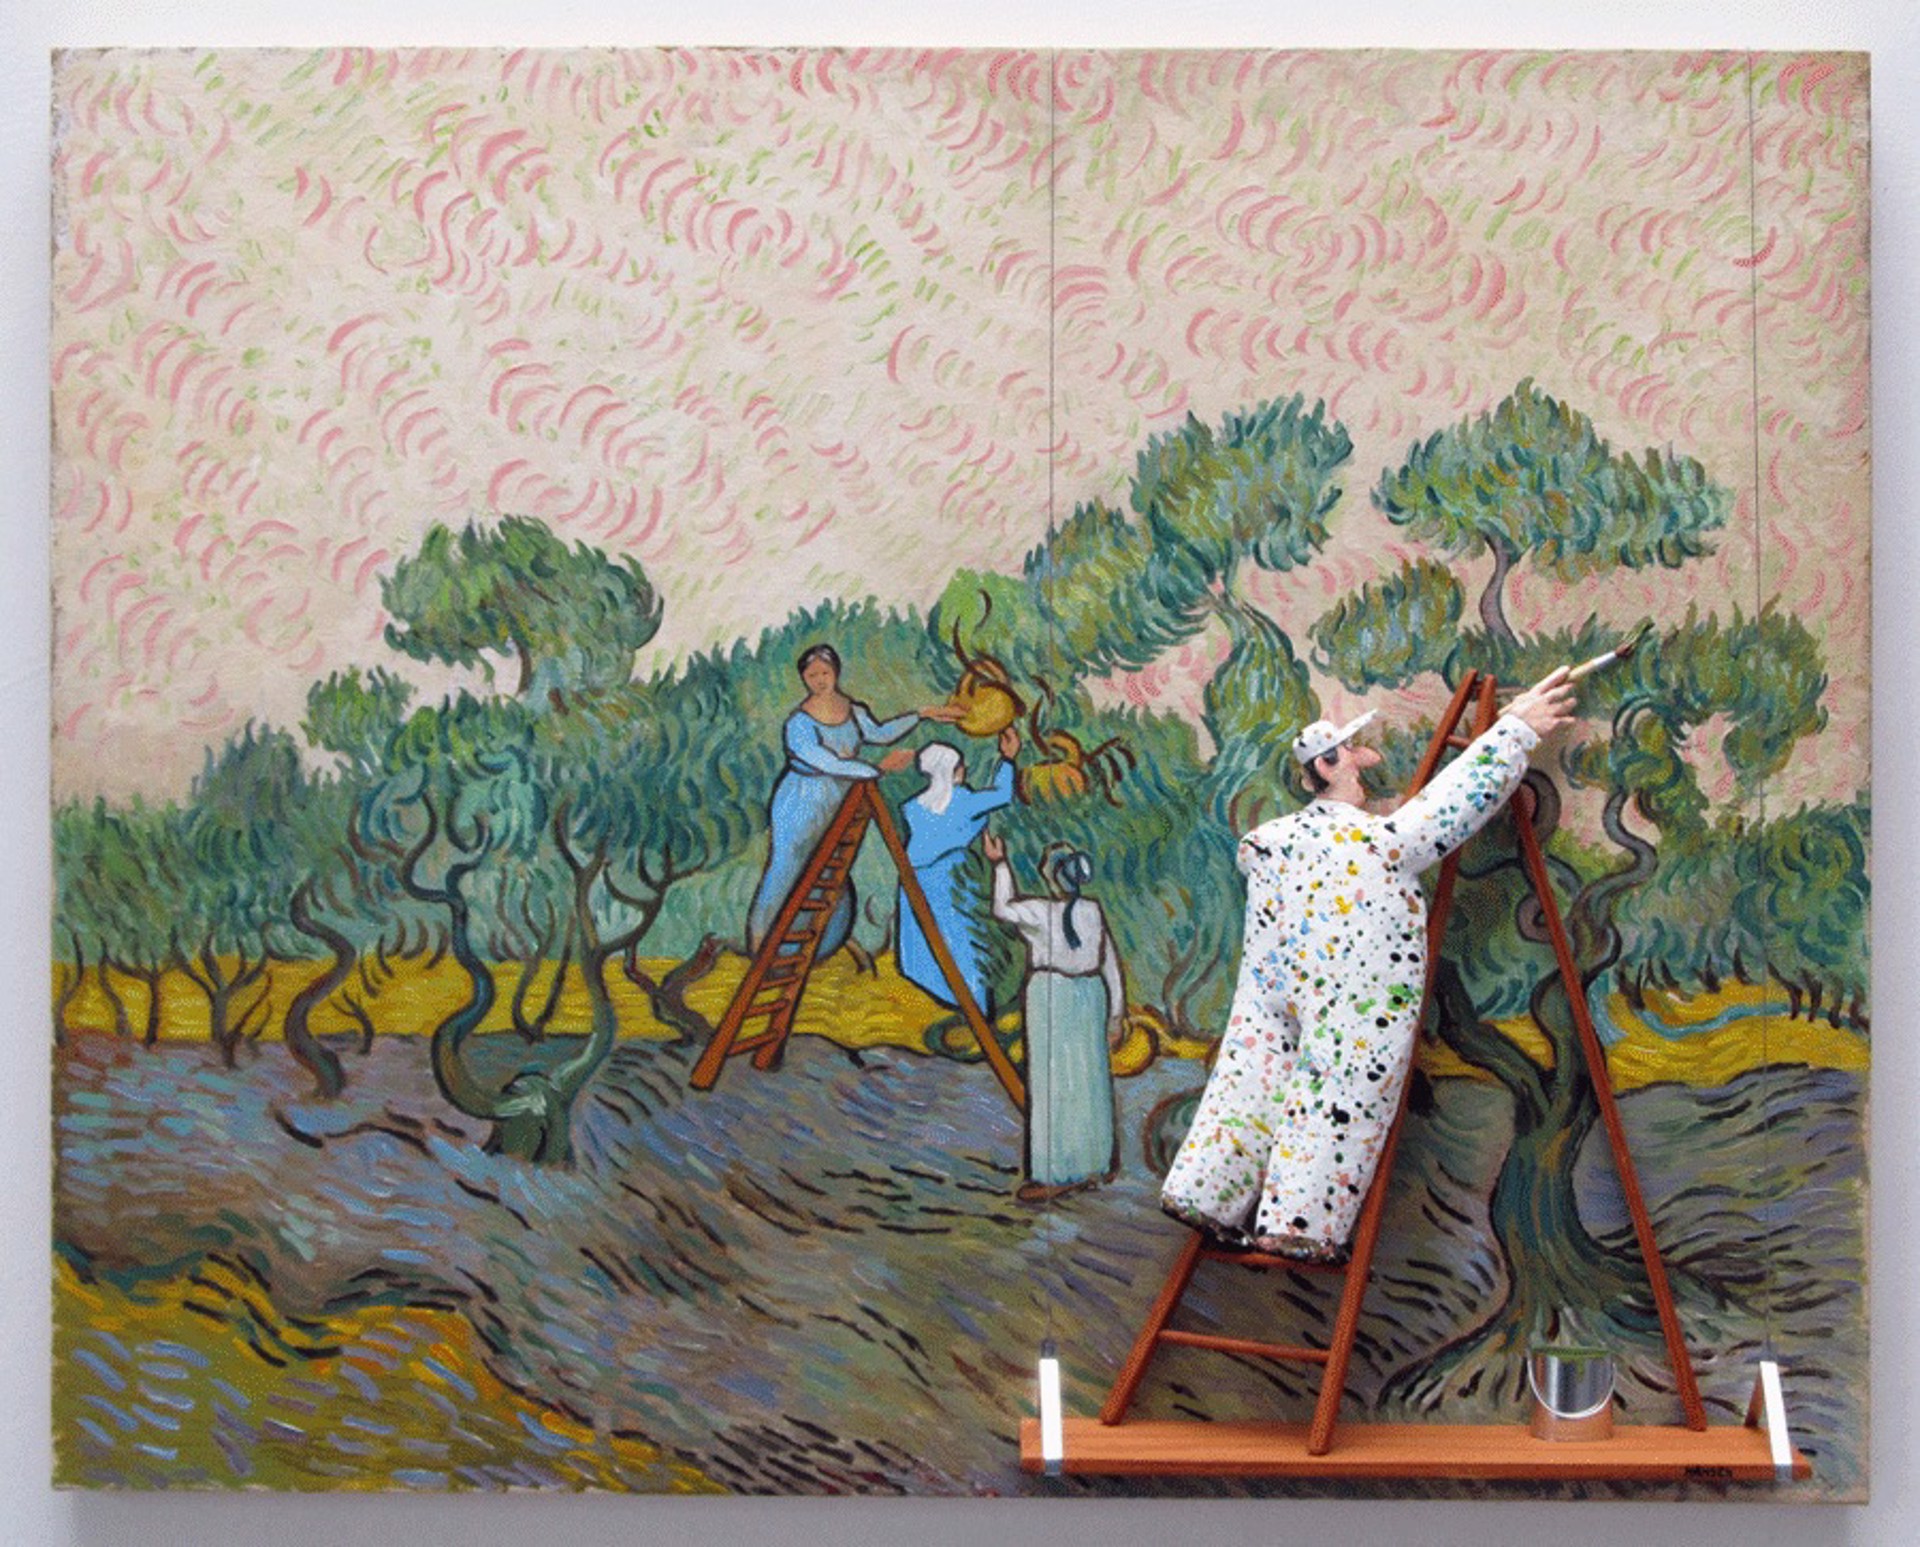 Stephen Hansen's tribute to Vincent Van Gogh's 1889 impressionist painting, Women Picking Olives